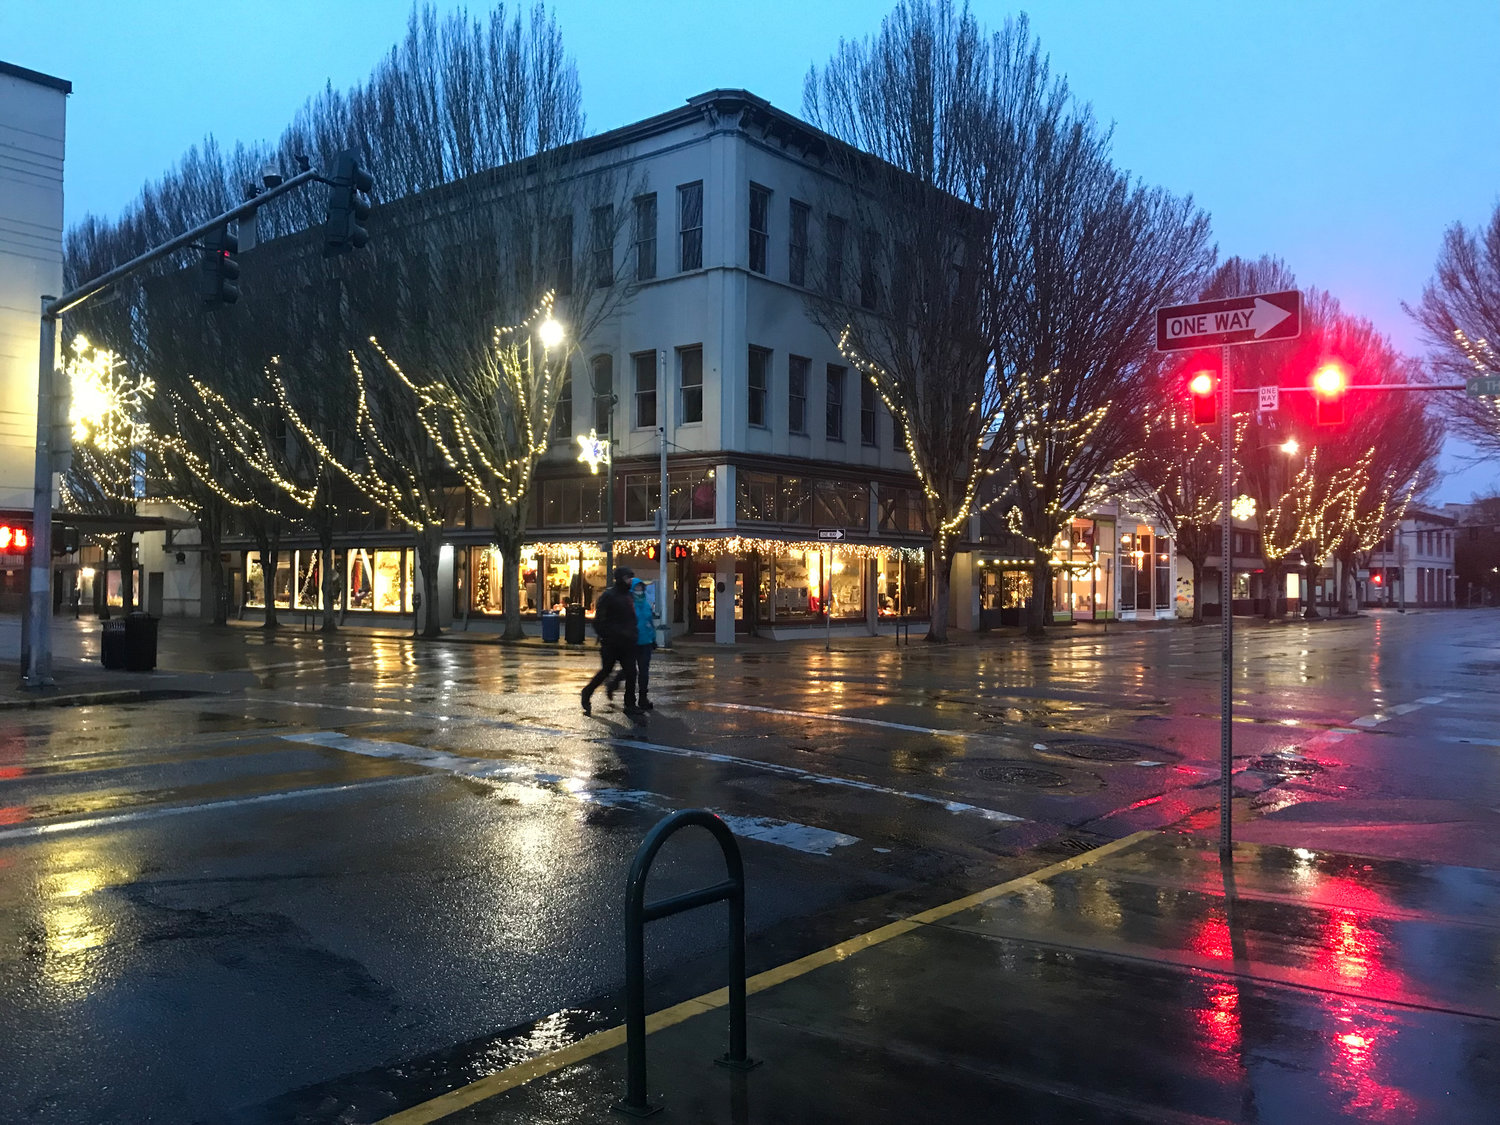 Downtown Olympia at 4:20 p.m. on Thanksgiving: No wonder we put up holiday lights!